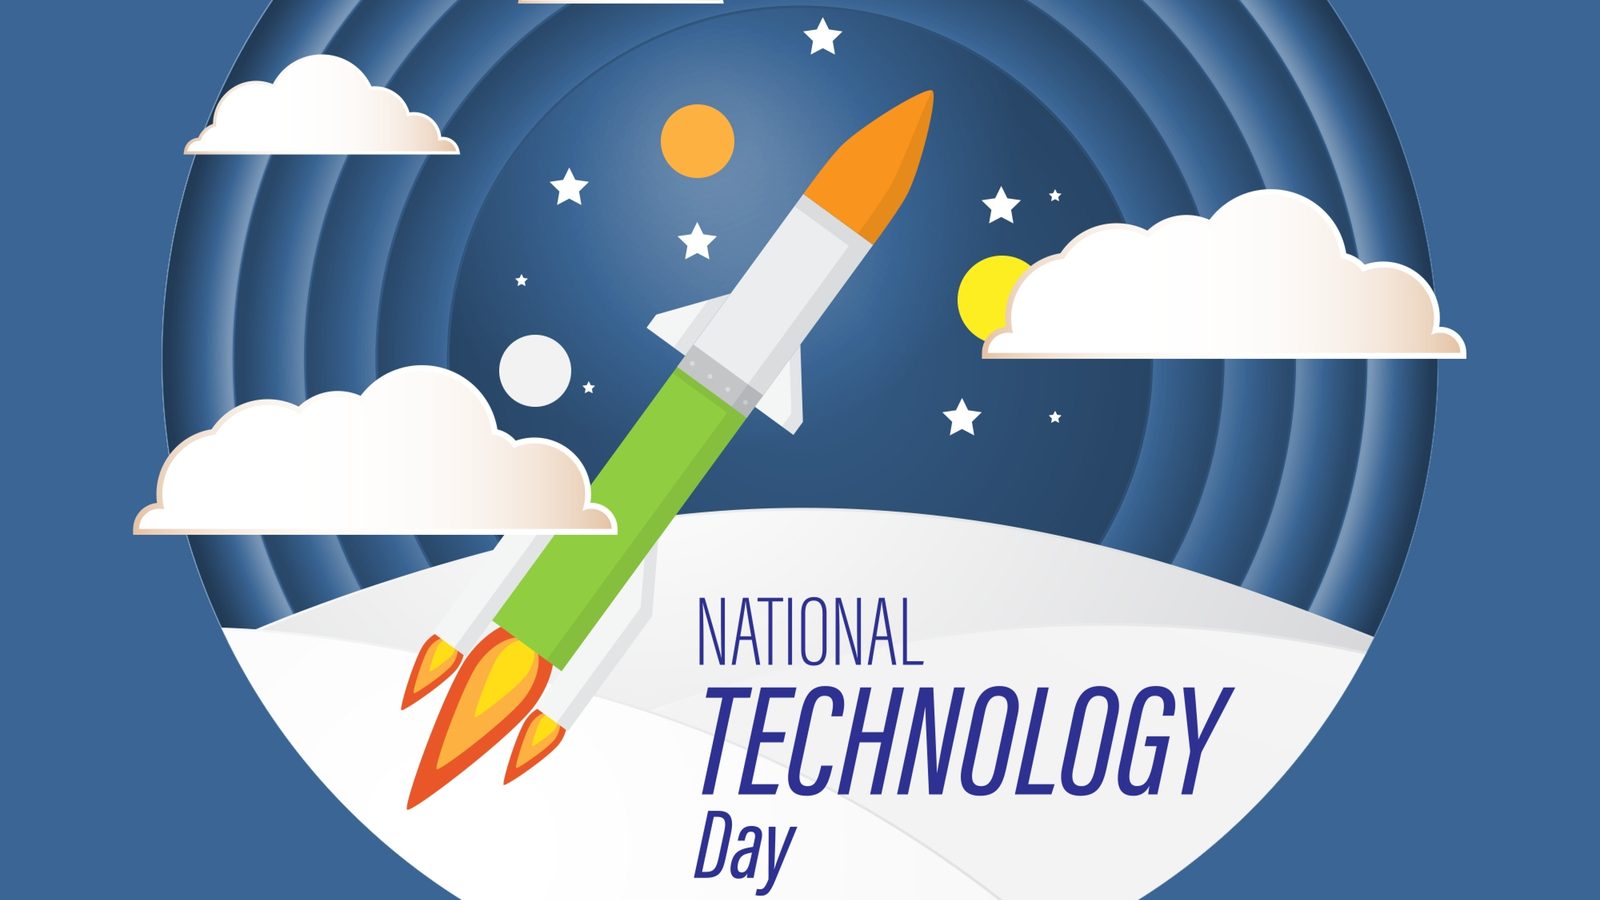 National Technology Day 2022 History, Significance and Why is it